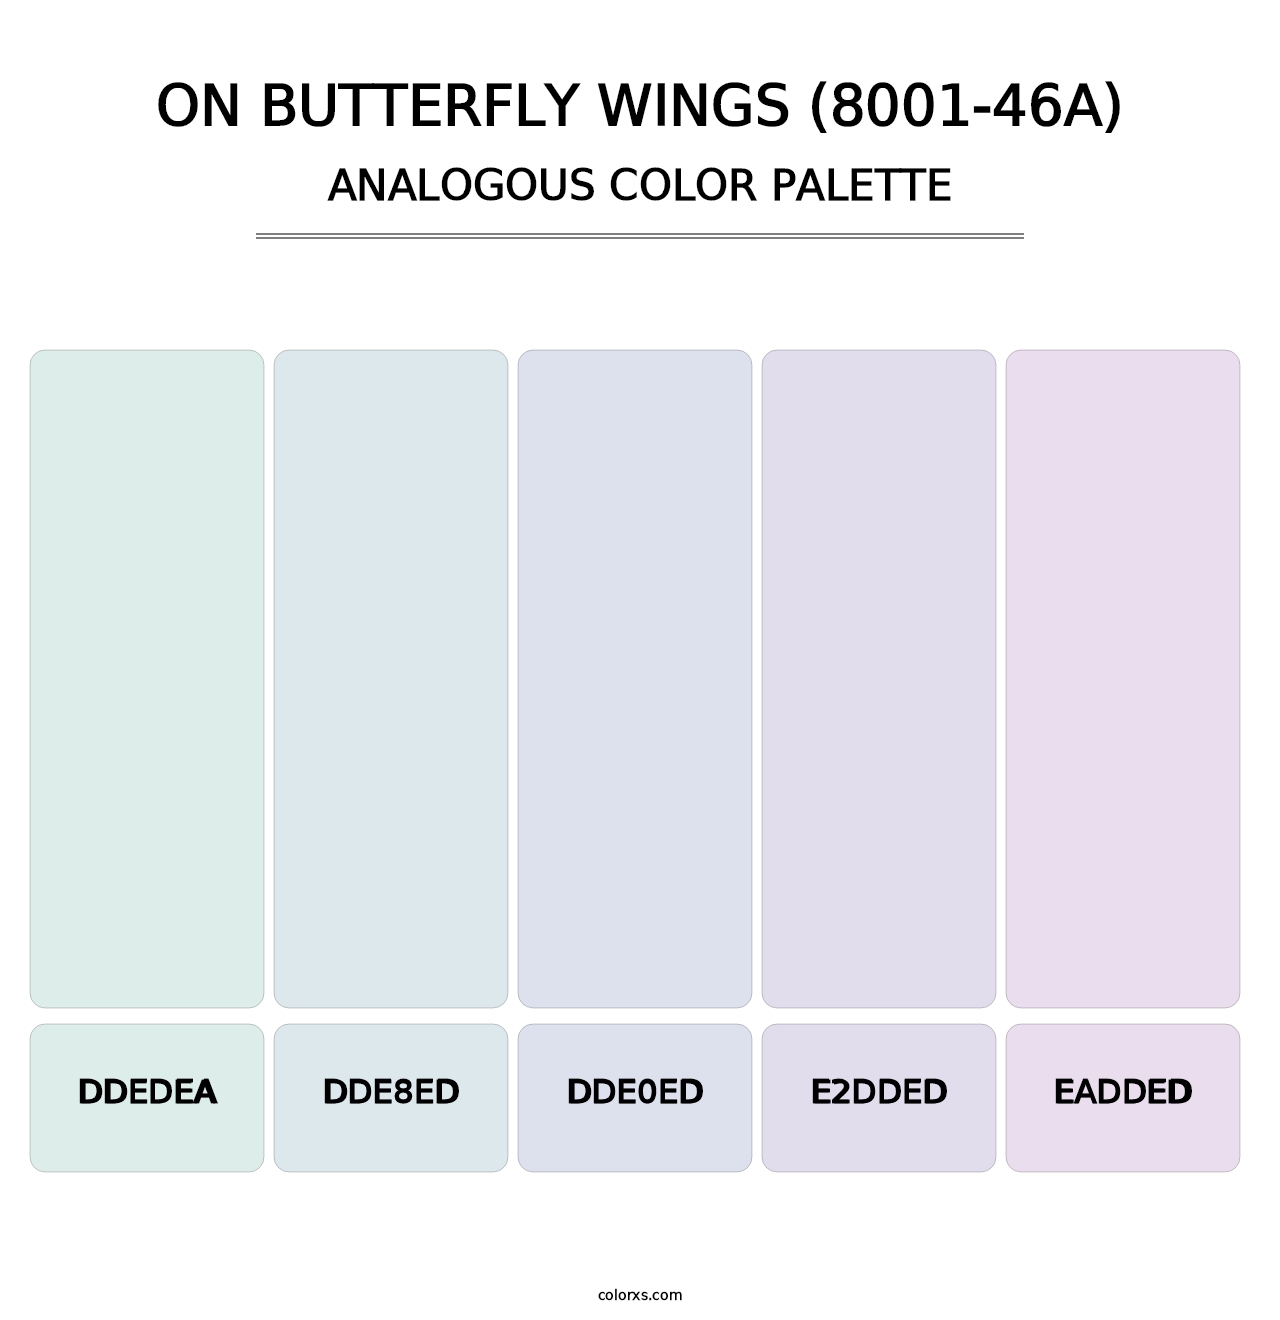 On Butterfly Wings (8001-46A) - Analogous Color Palette